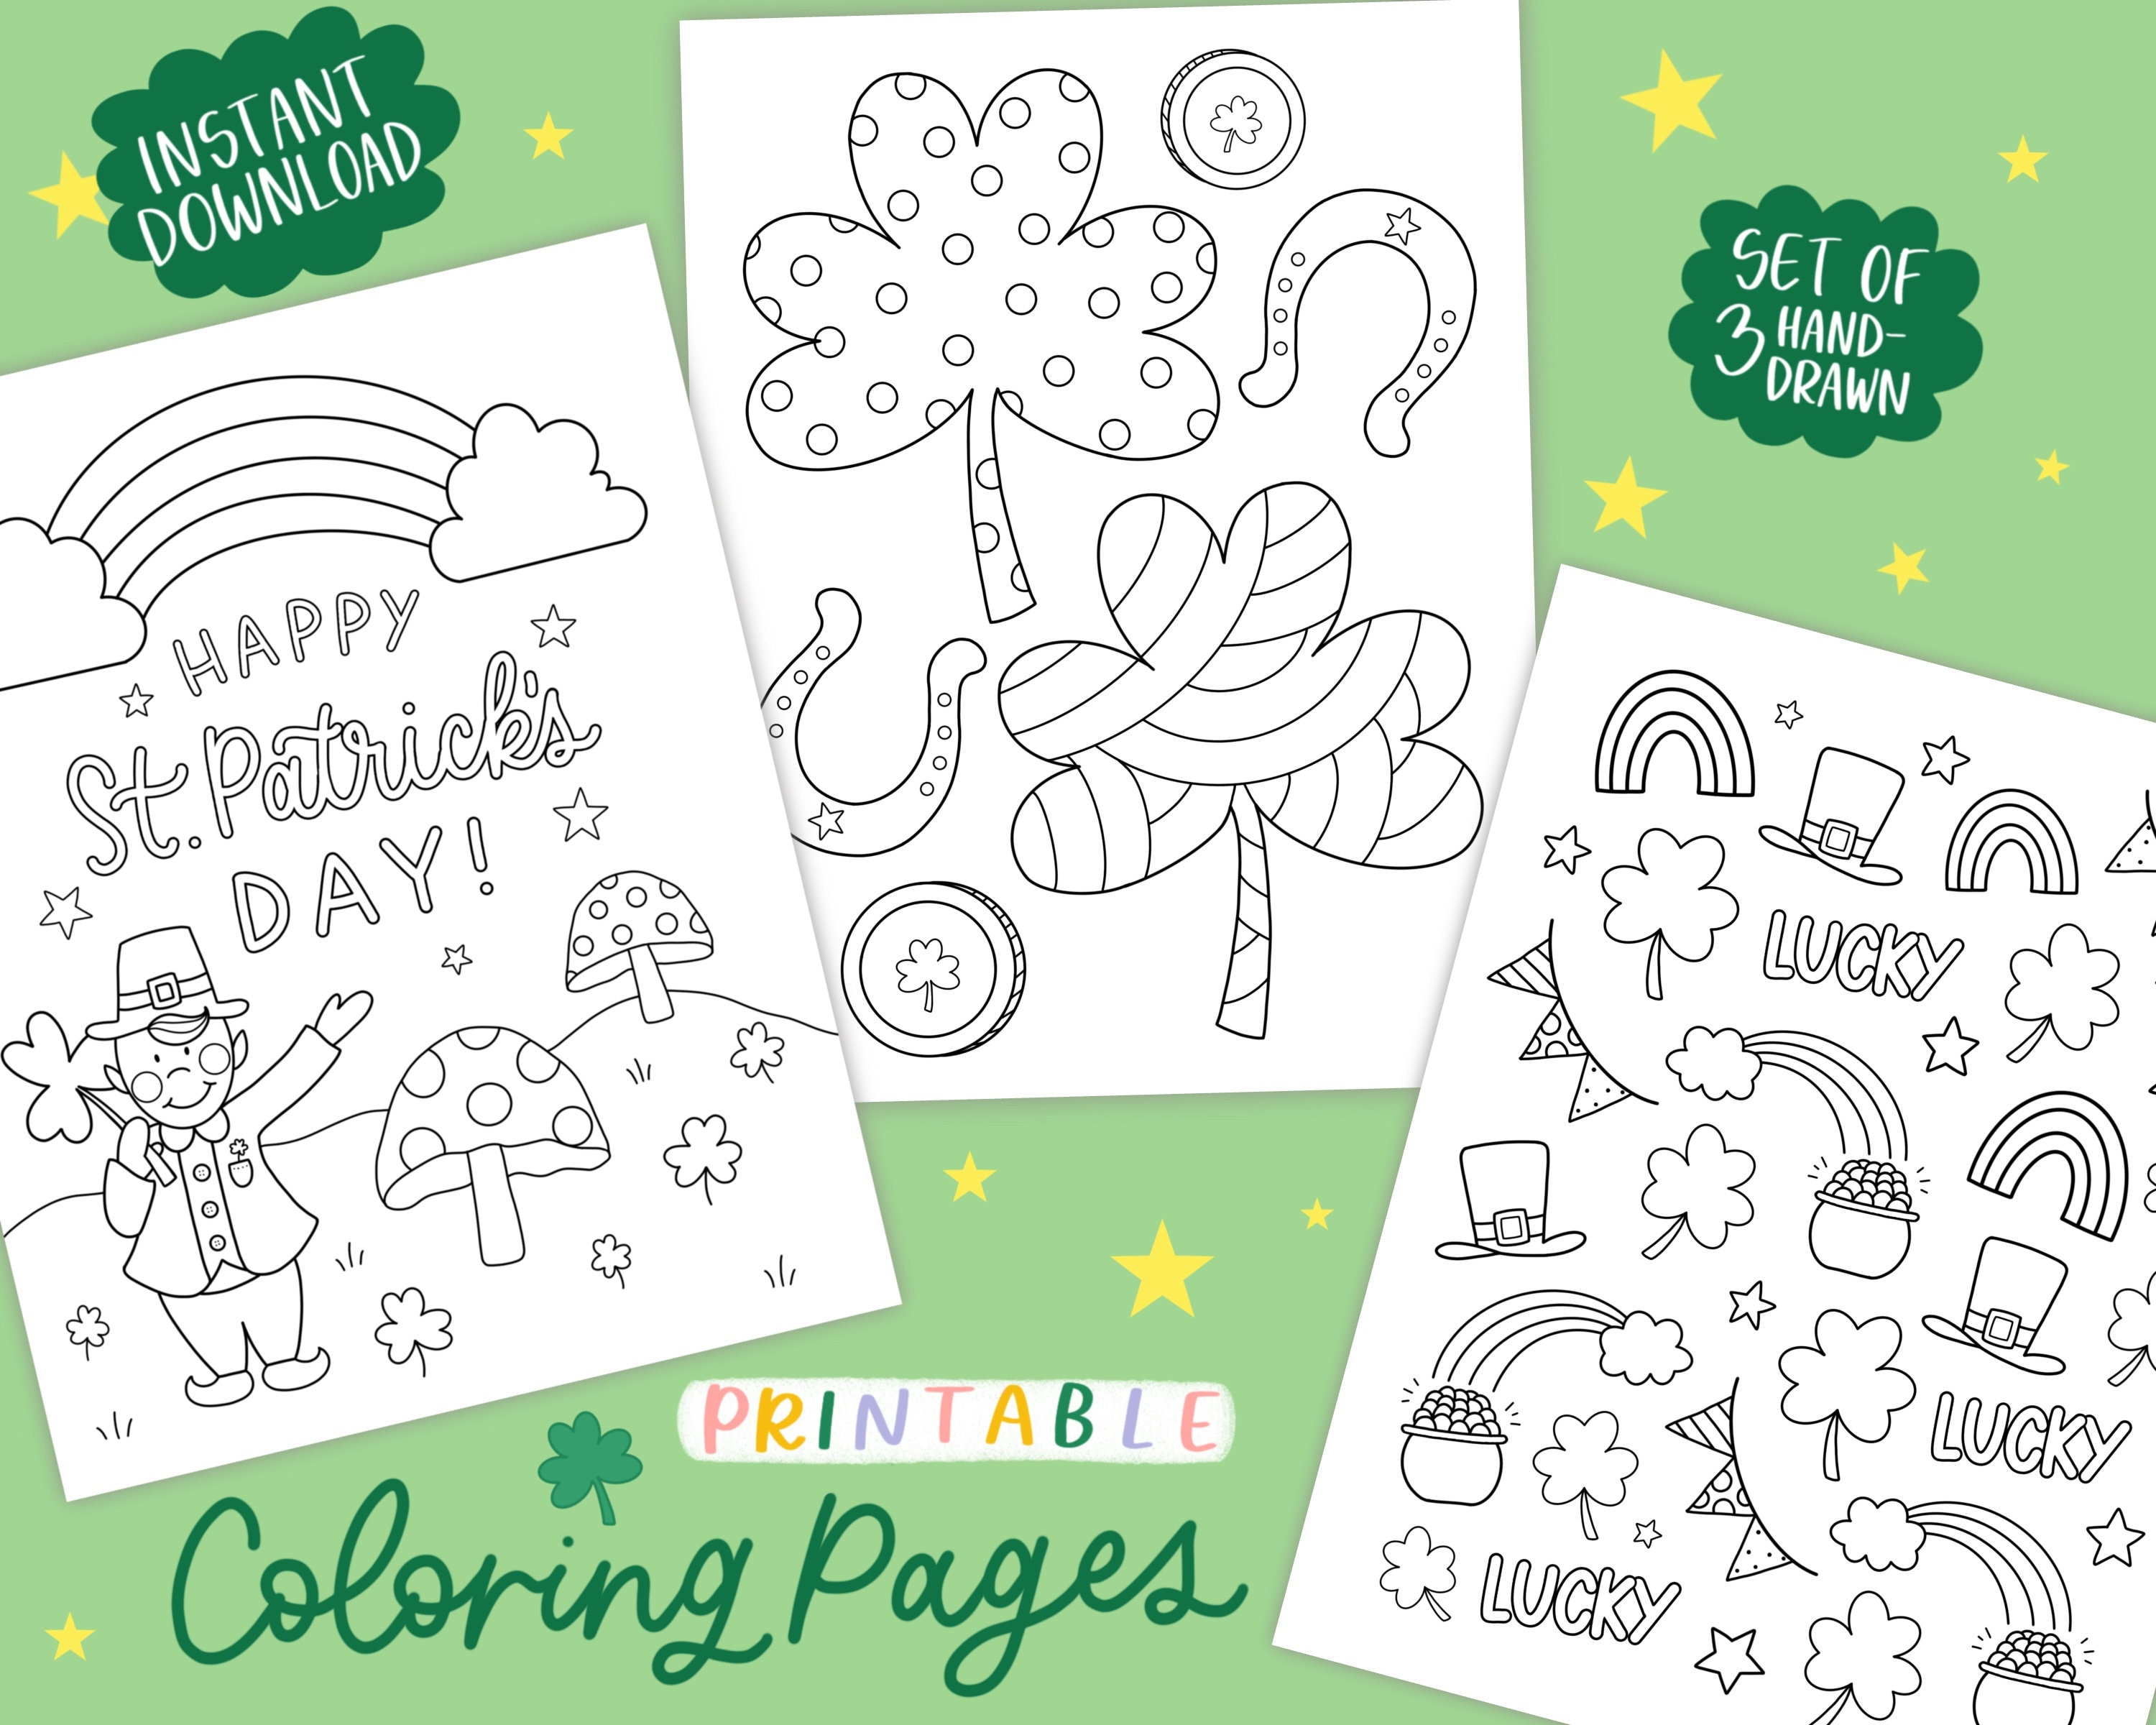 St. Patrick's Day Coloring Activity Book for Kids: Happy Patrick's